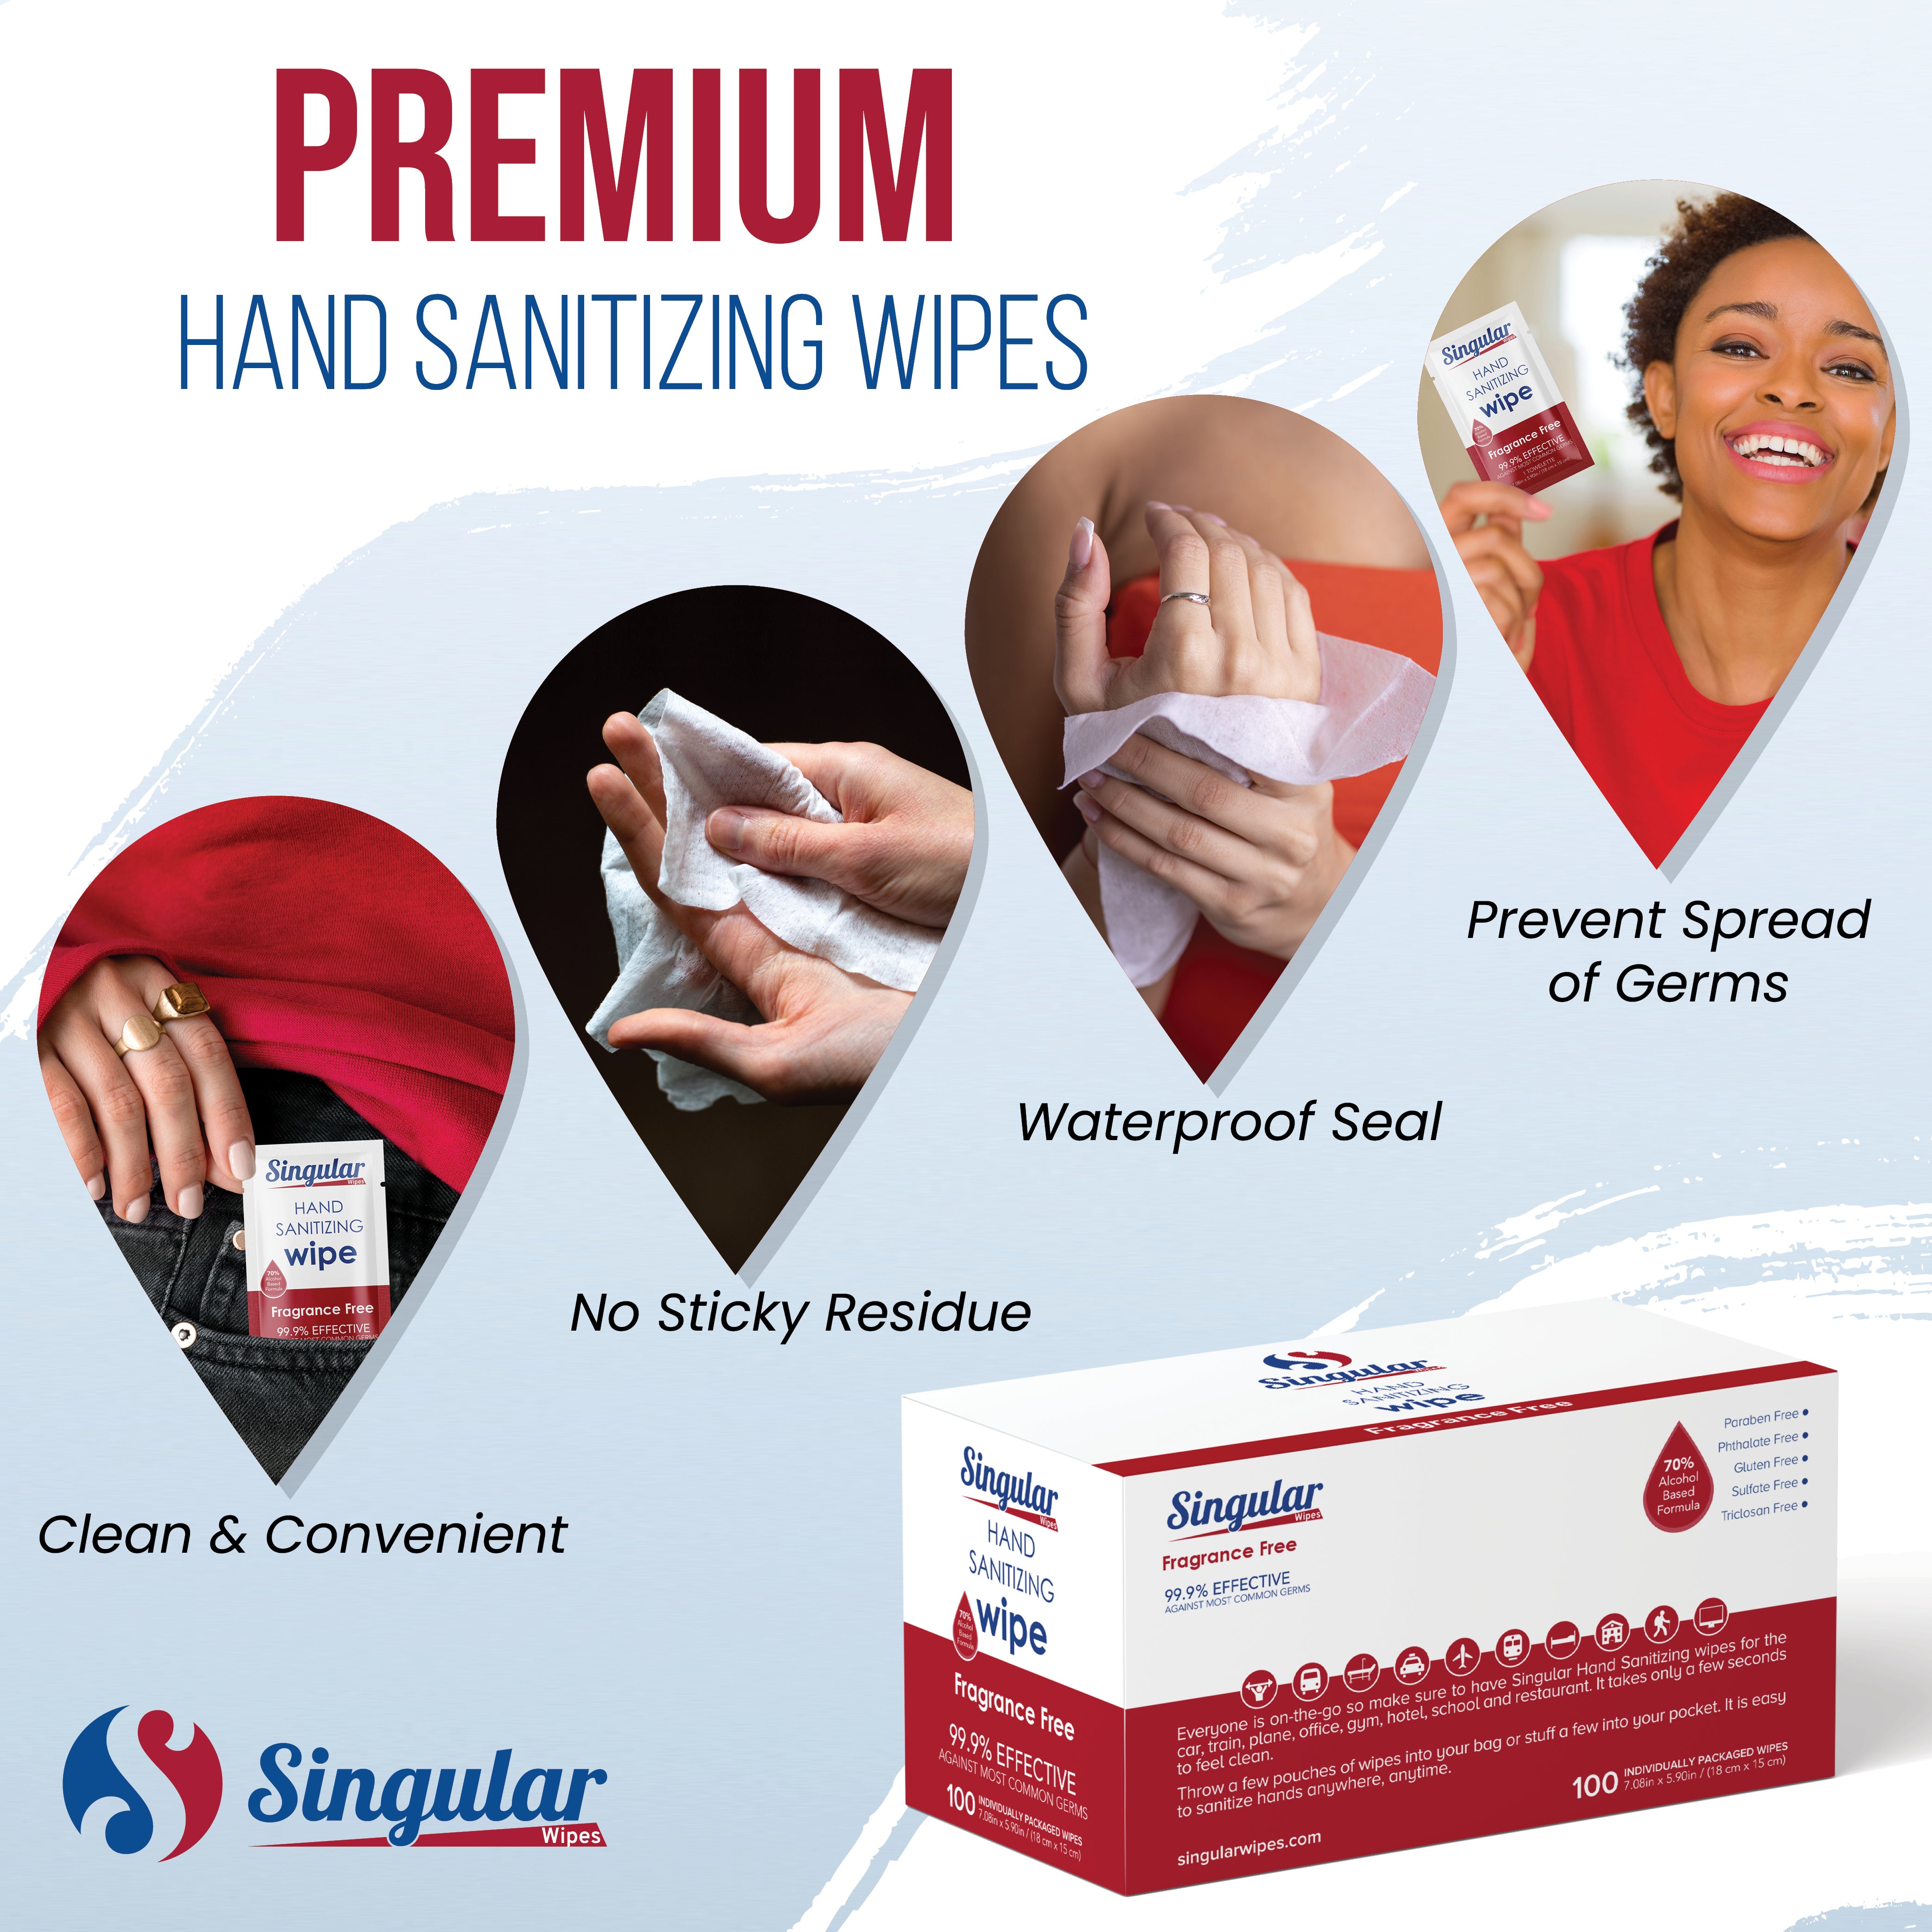 HAND SANITIZING WIPES- 100ct - Individually Packed Premium Hand Sanitizing Wipes for Travel, Home, Office, School, etc. Fragrance Free with Moisturizer - Made in USA